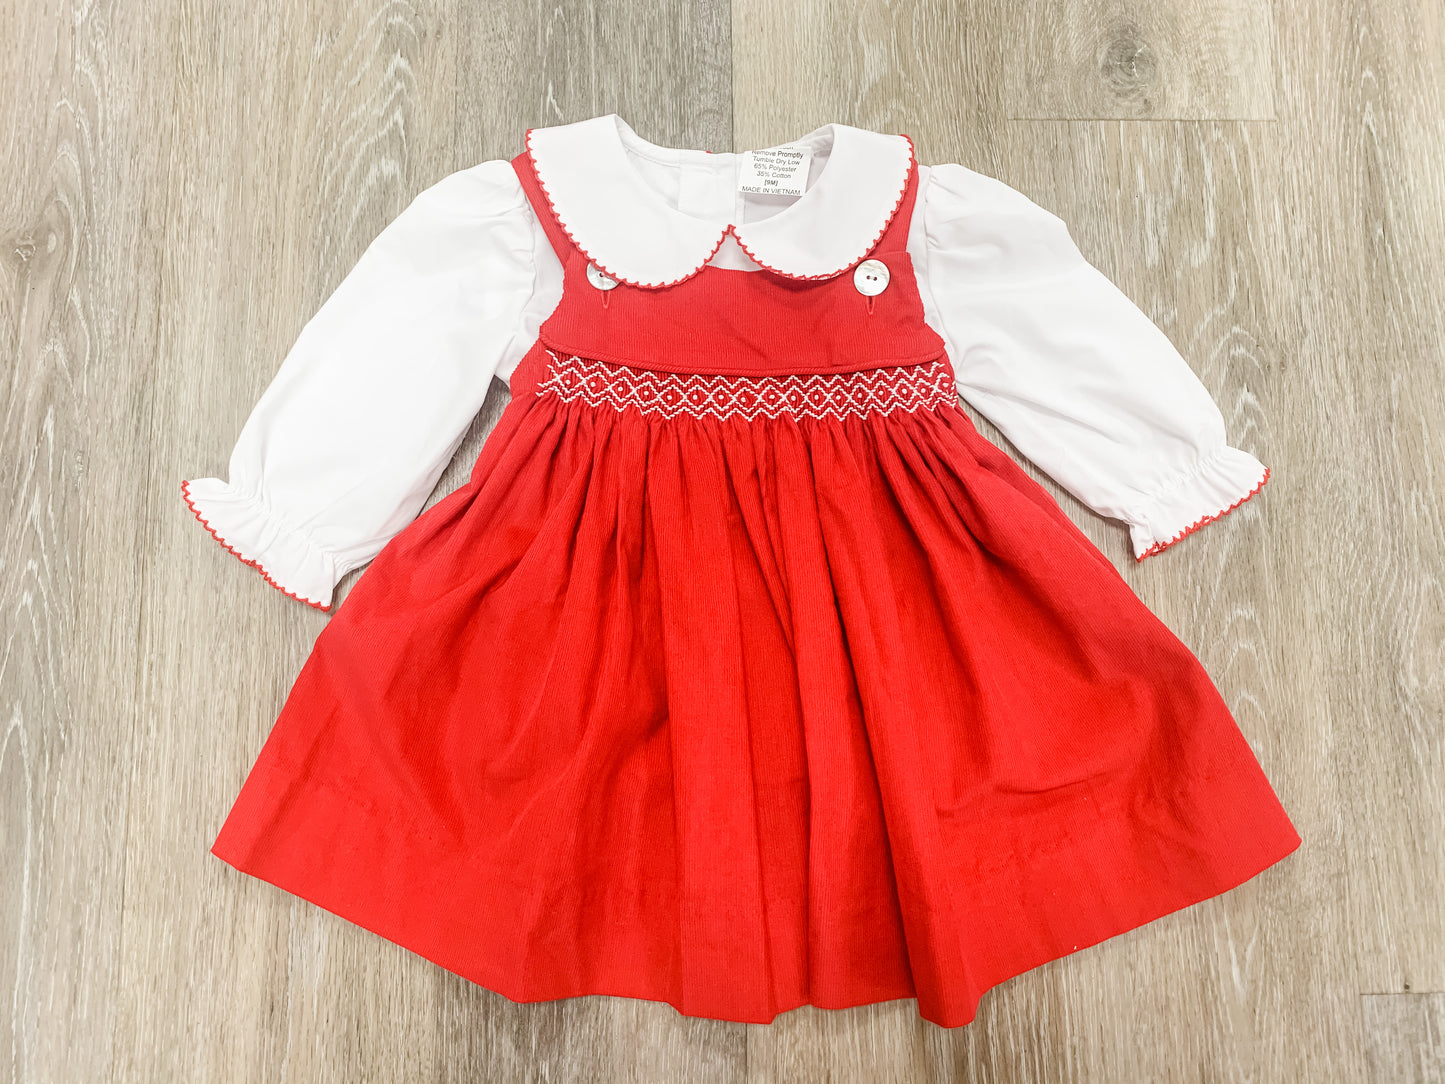 Red Cord Geo Dress with White Shirt  - Doodlebug's Children's Boutique